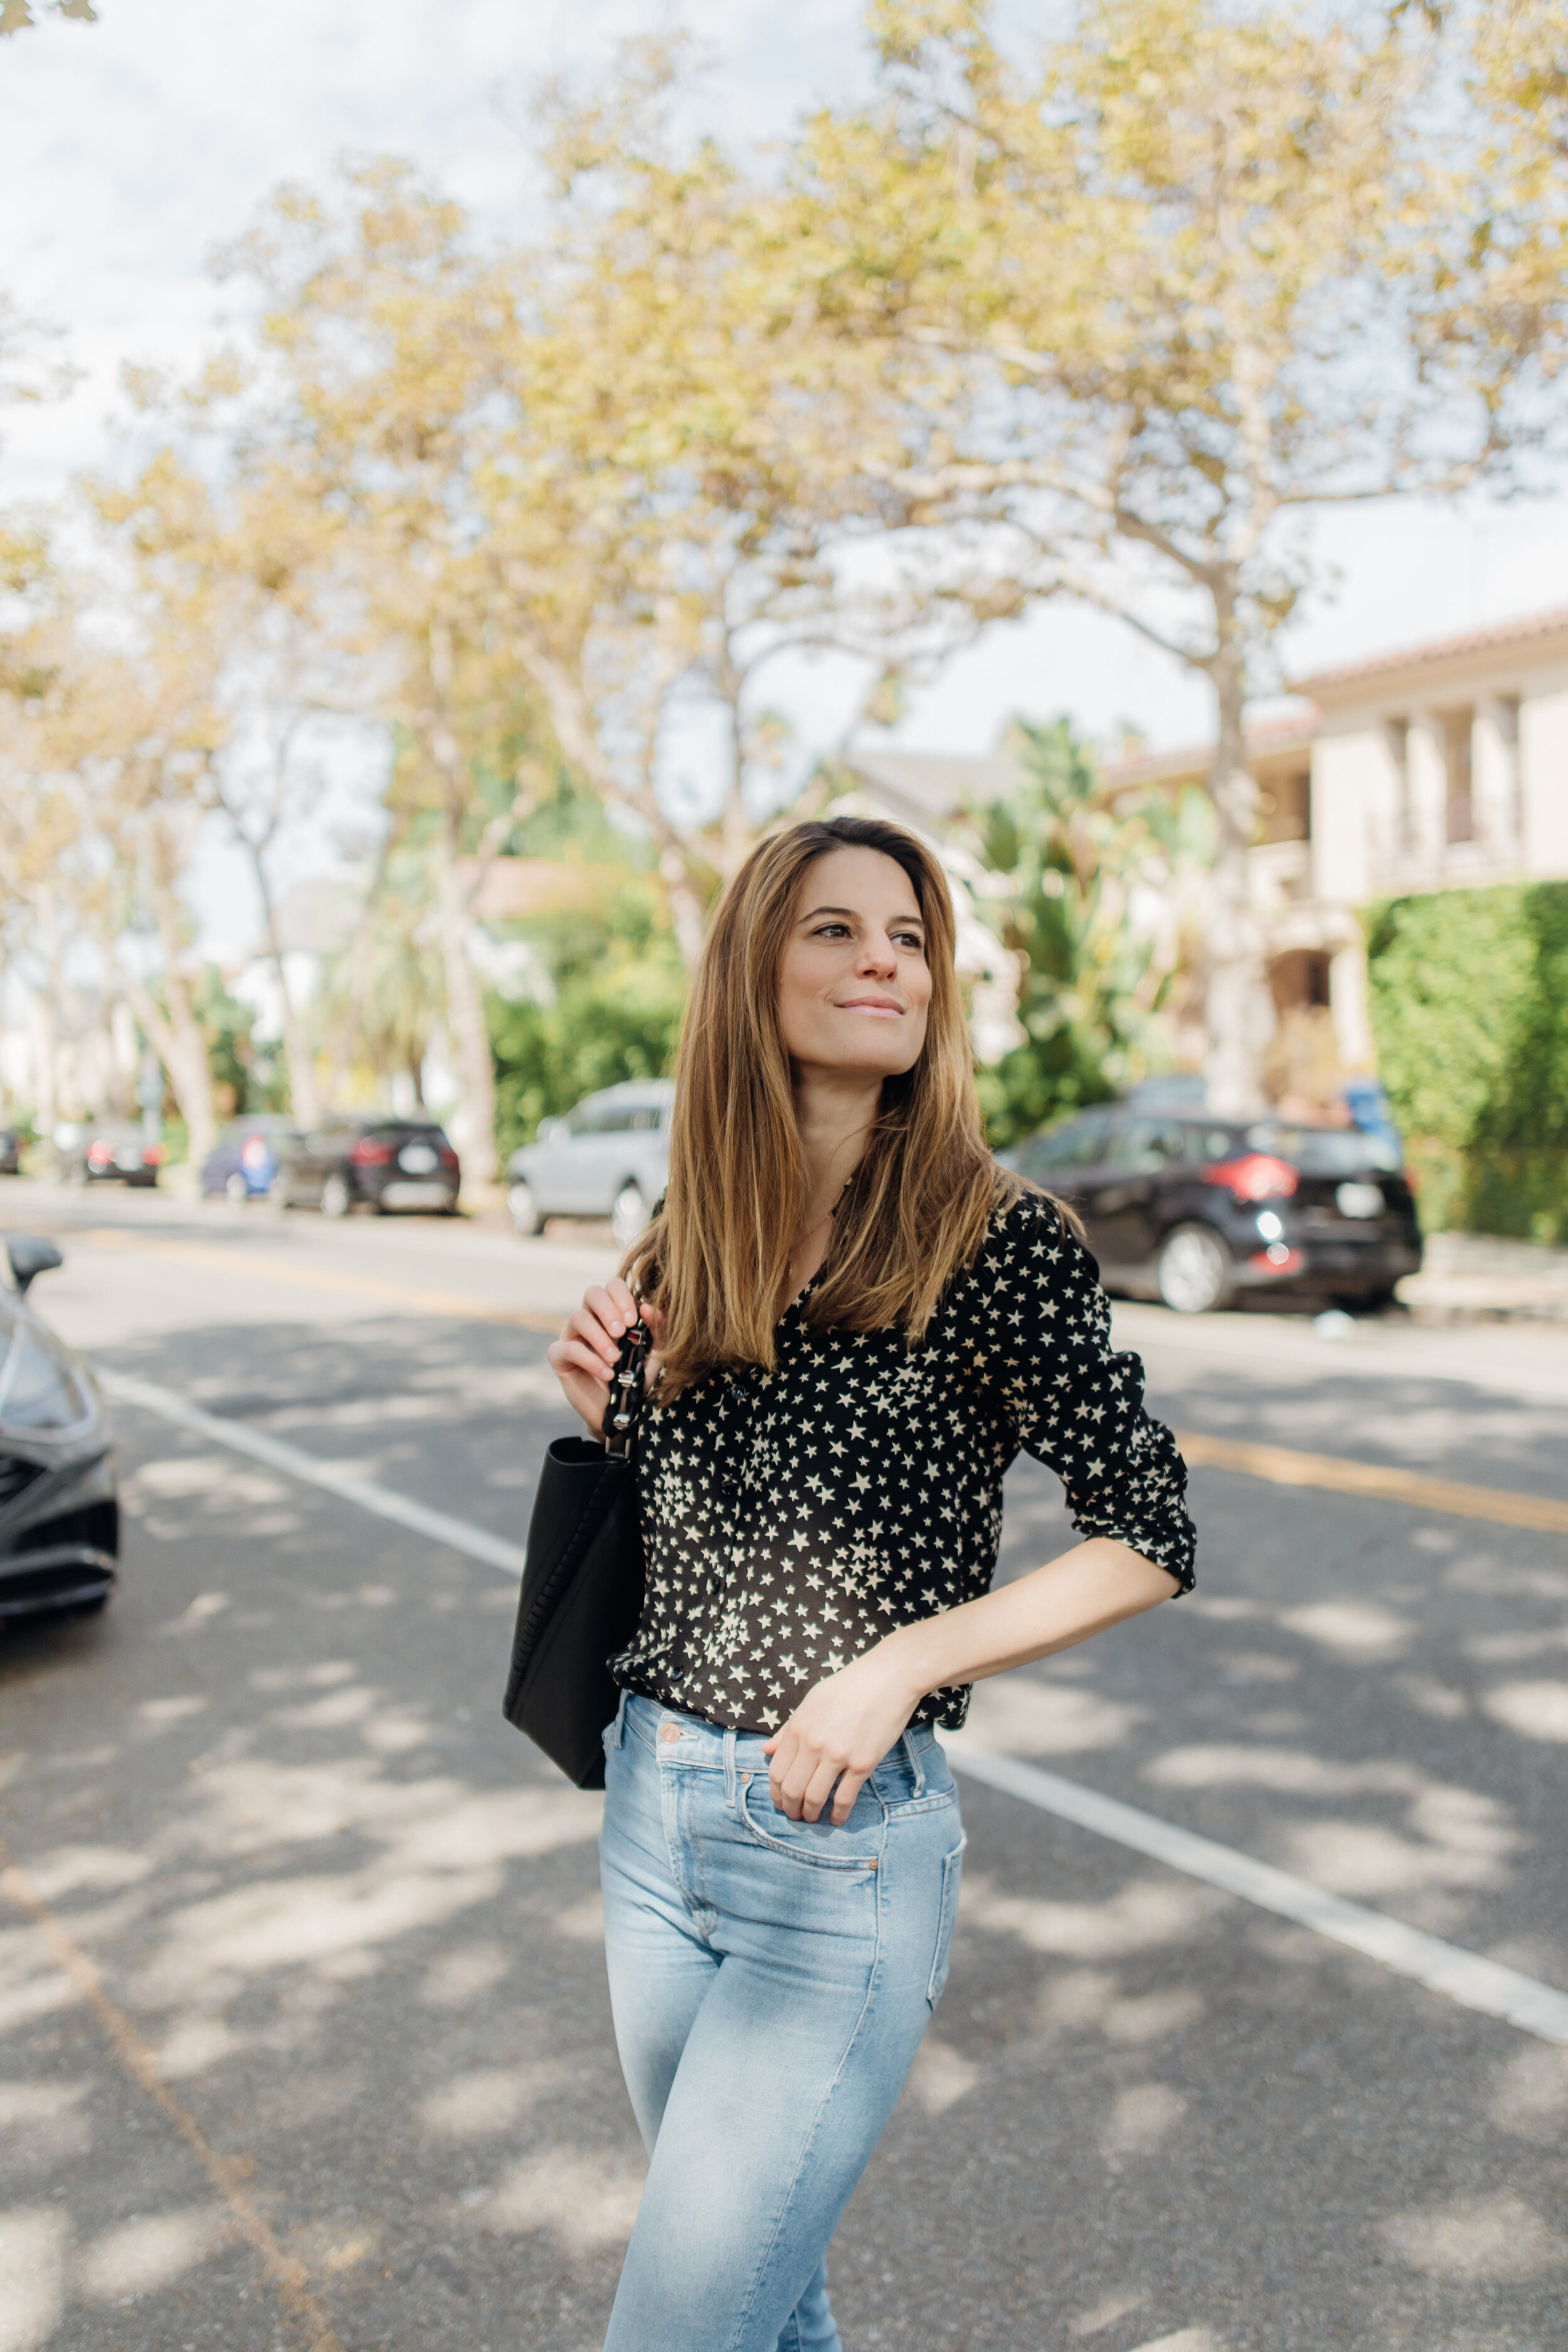 WARDROBE MUST-HAVE! Polka dot shirt with jeans is always a classic